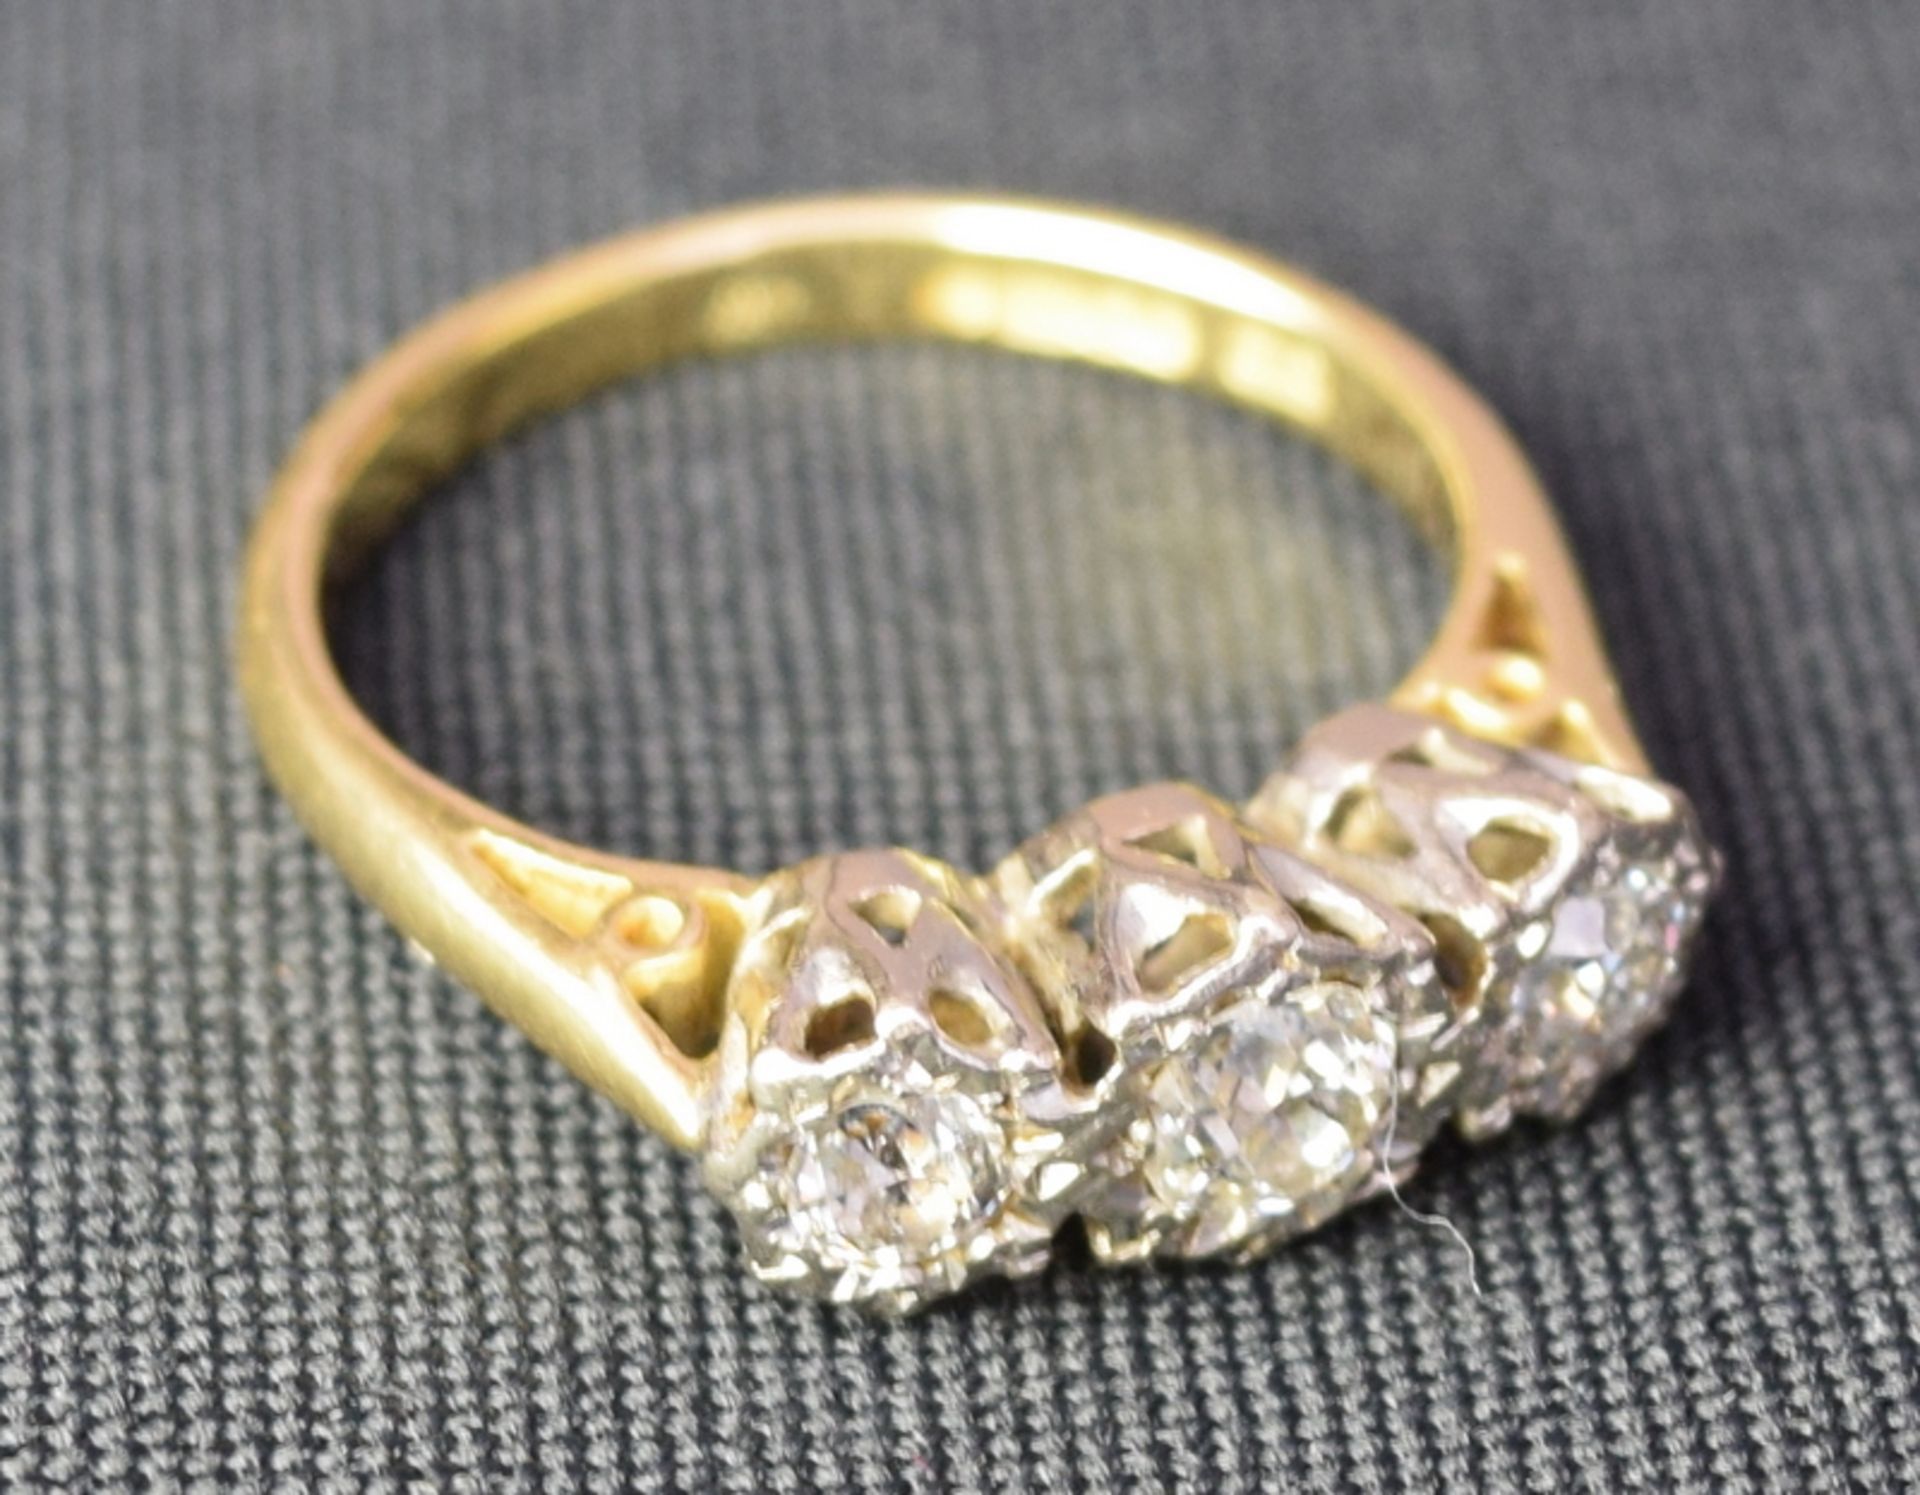 3 Diamond Trilogy Ring on 18ct gold band - Image 4 of 4